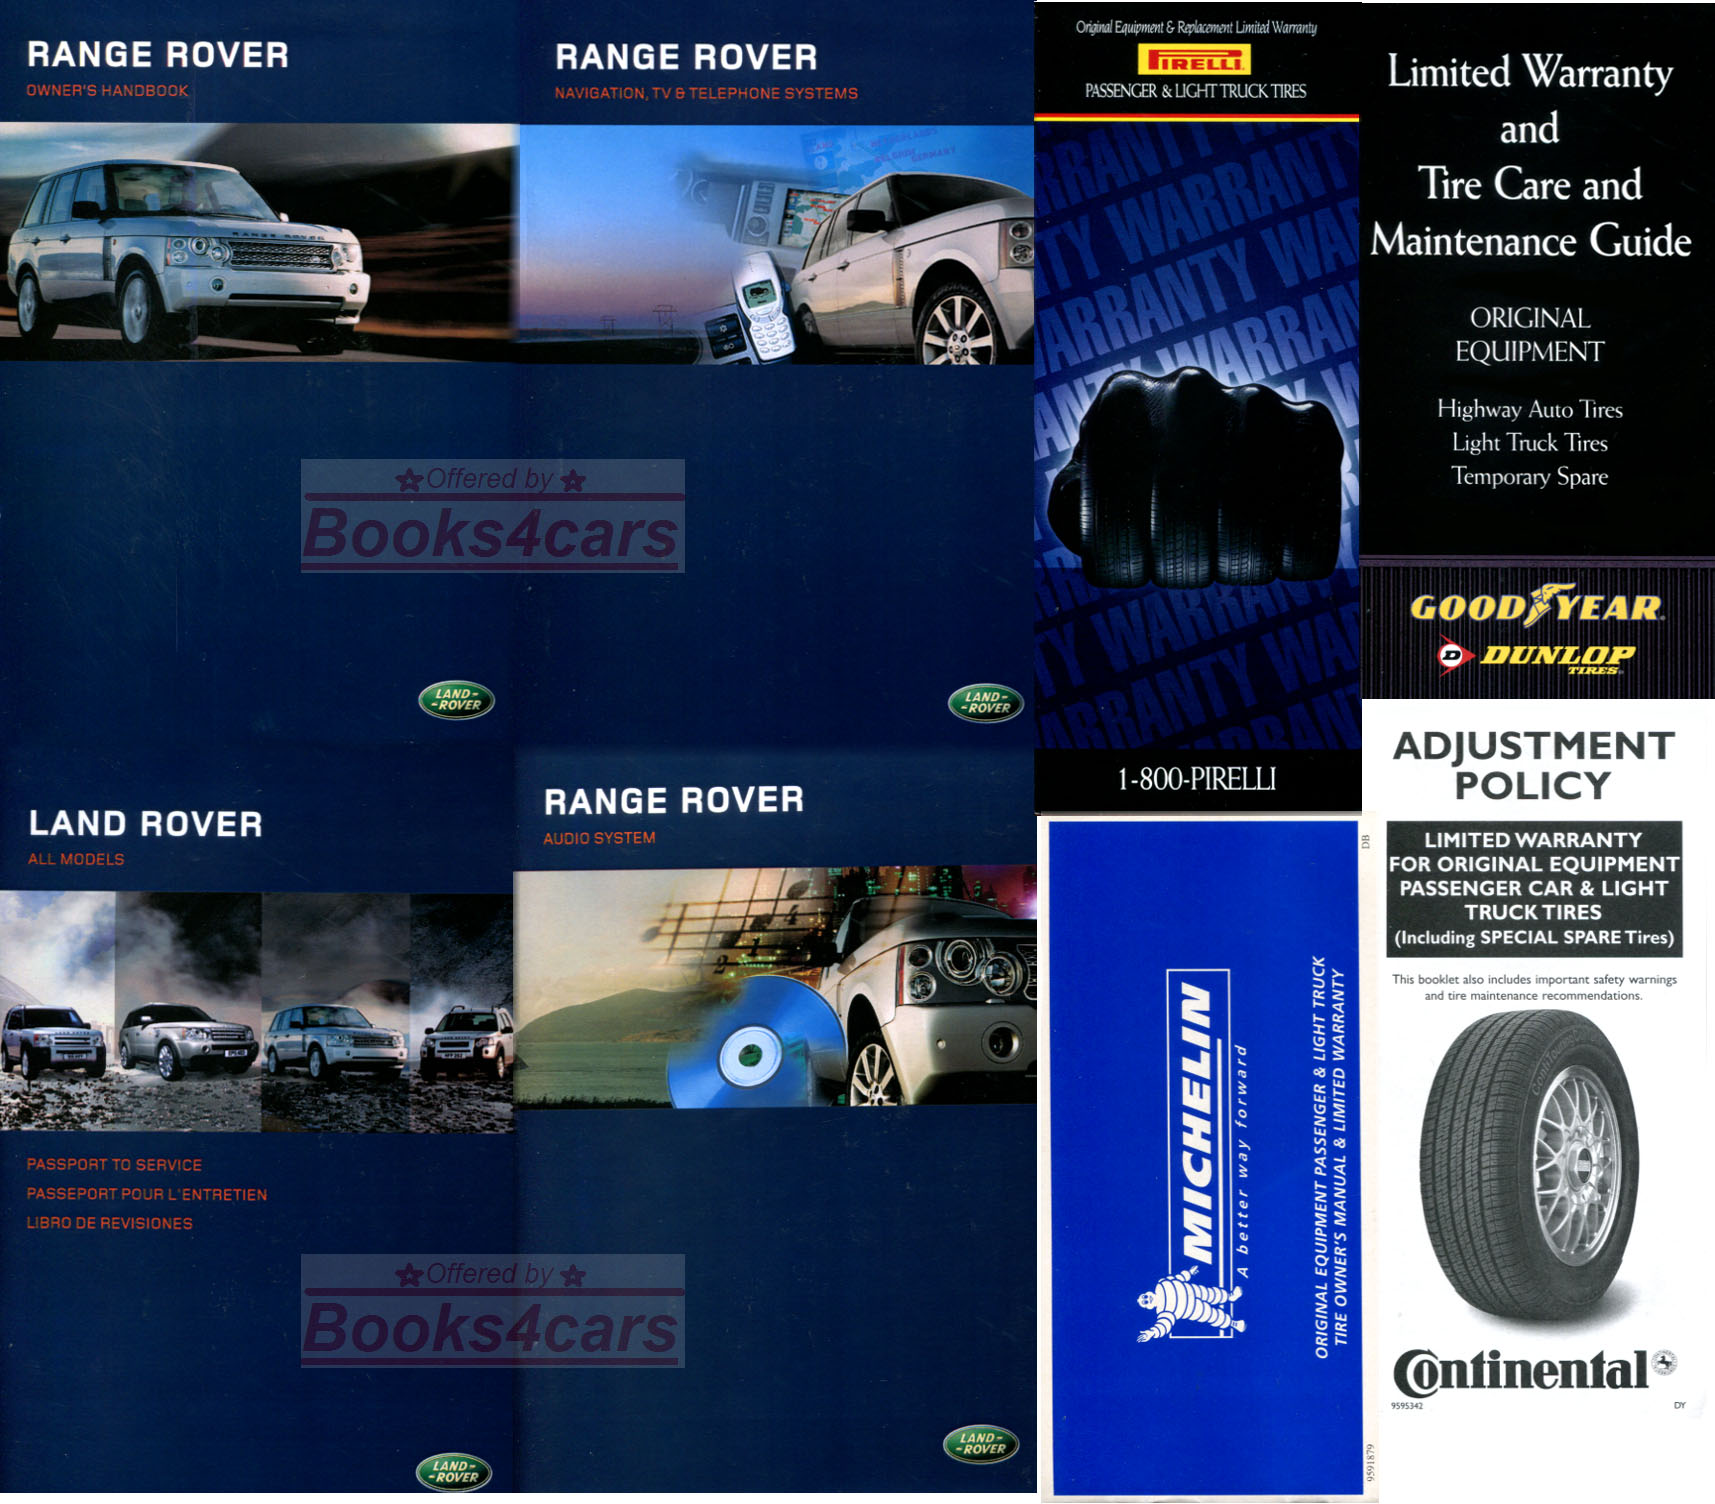 02-12 Range Rover owners manual by Land Rover